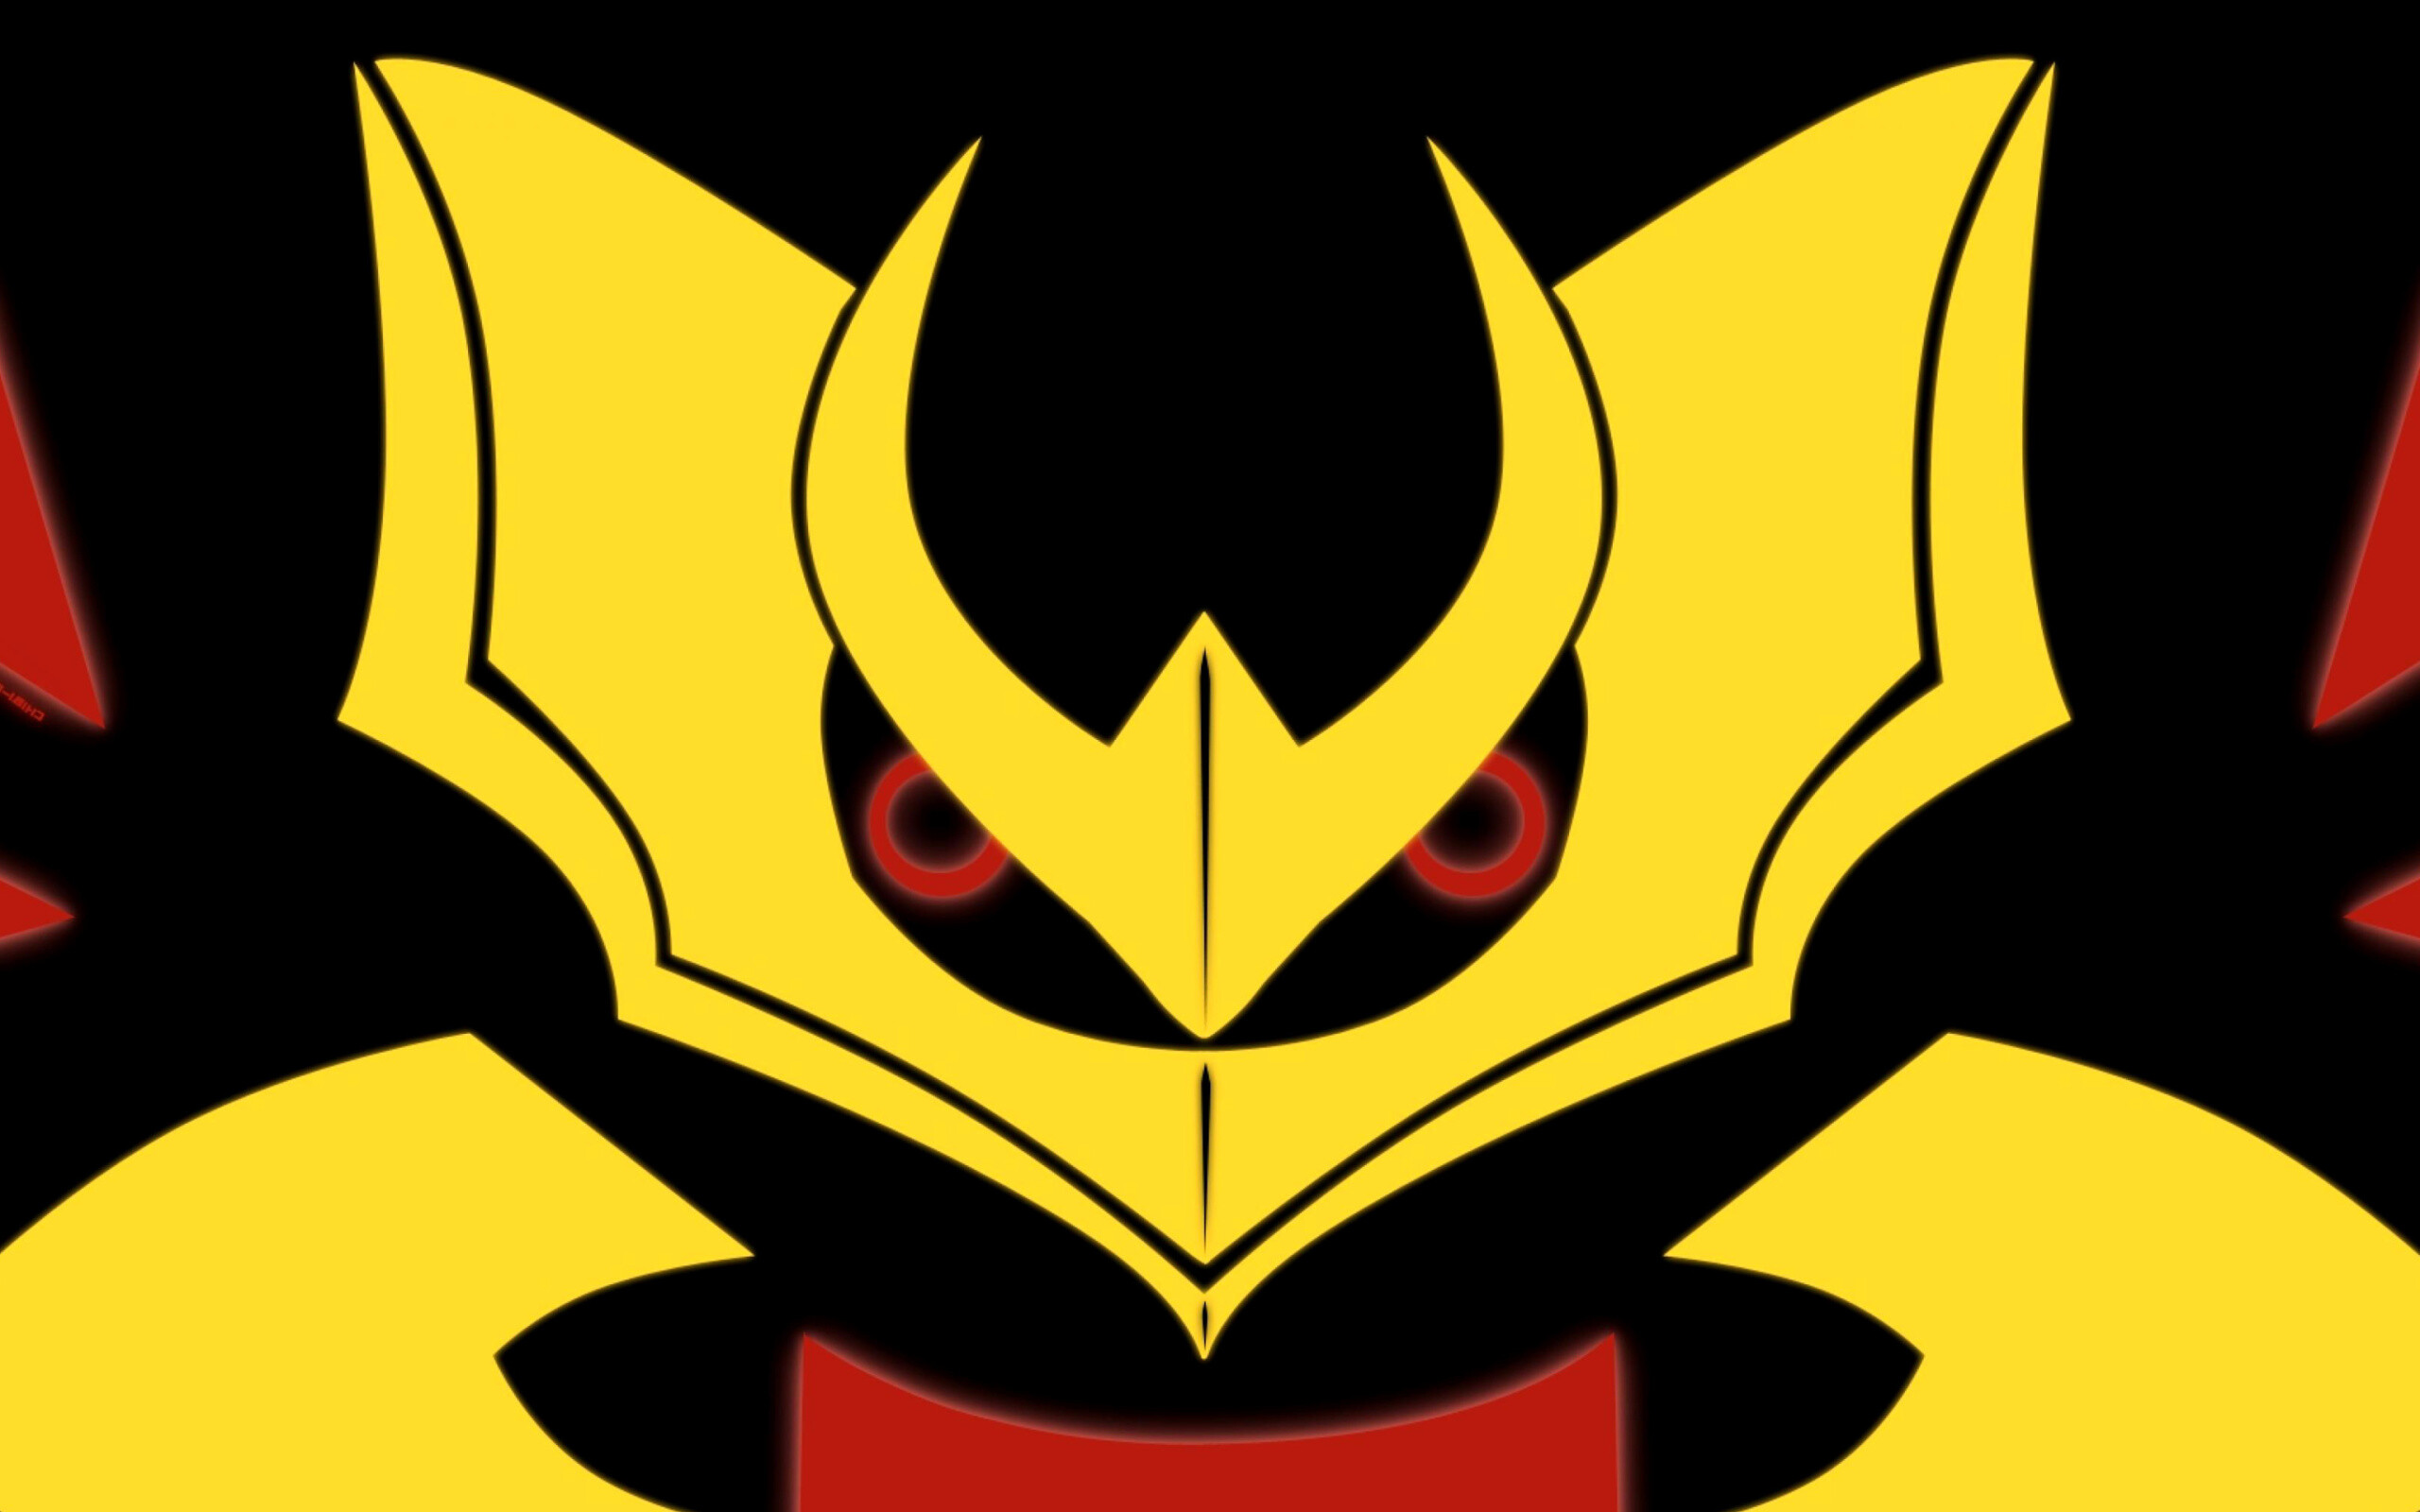 Giratina: A recurring antagonistic force in Pokemon Adventures, Red eyes, A gold crown-like object on the head. 2560x1600 HD Background.